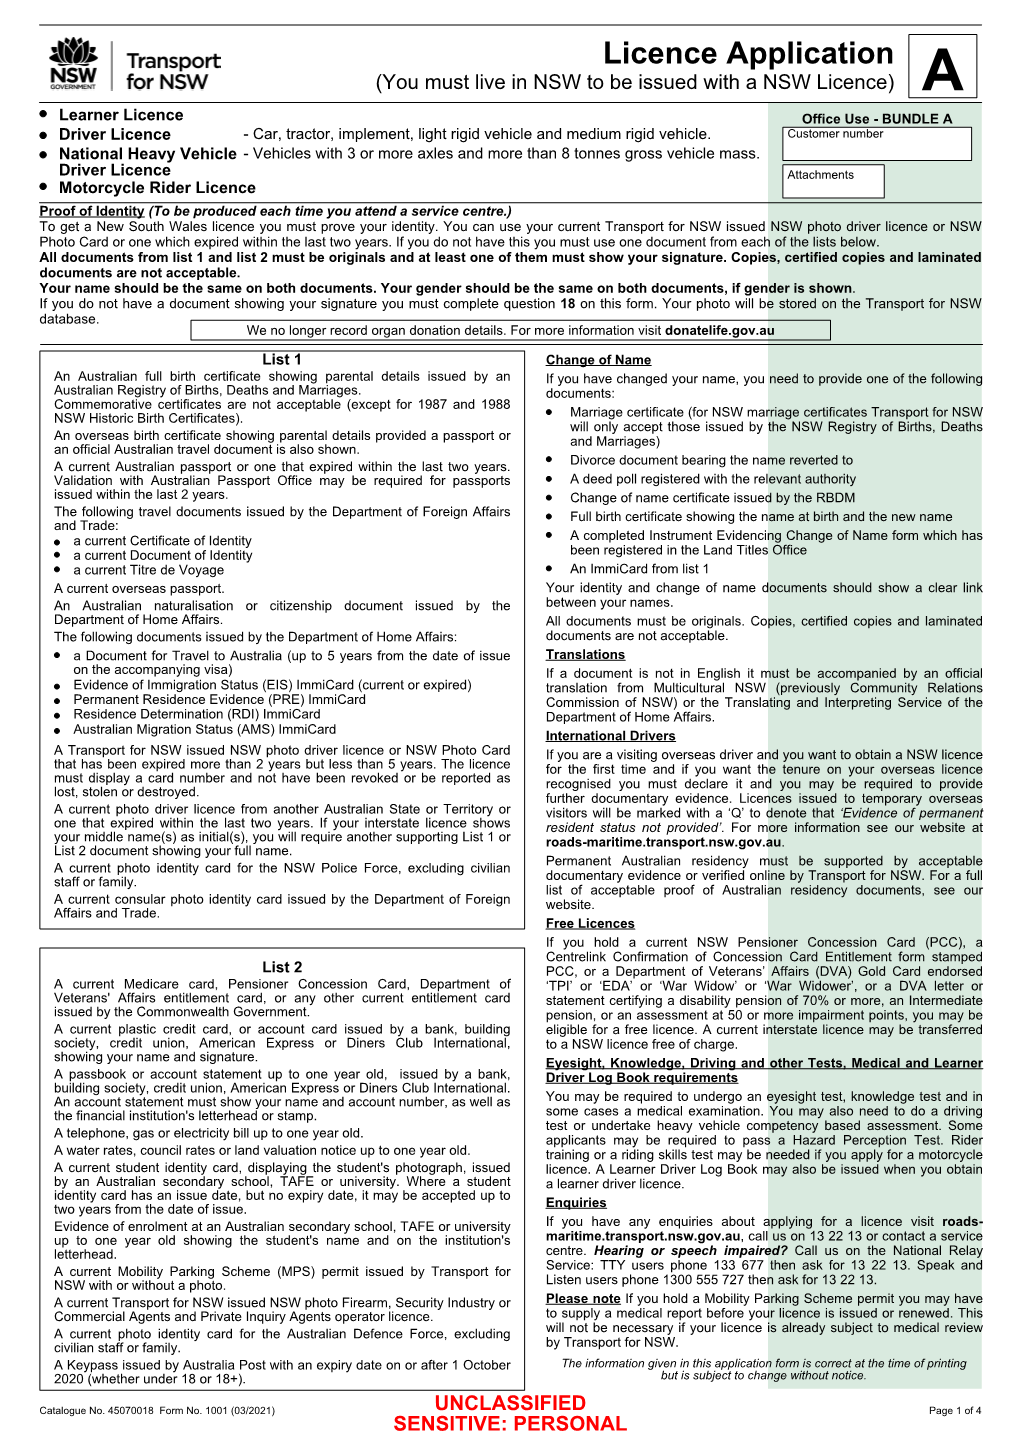 Licence Application Form